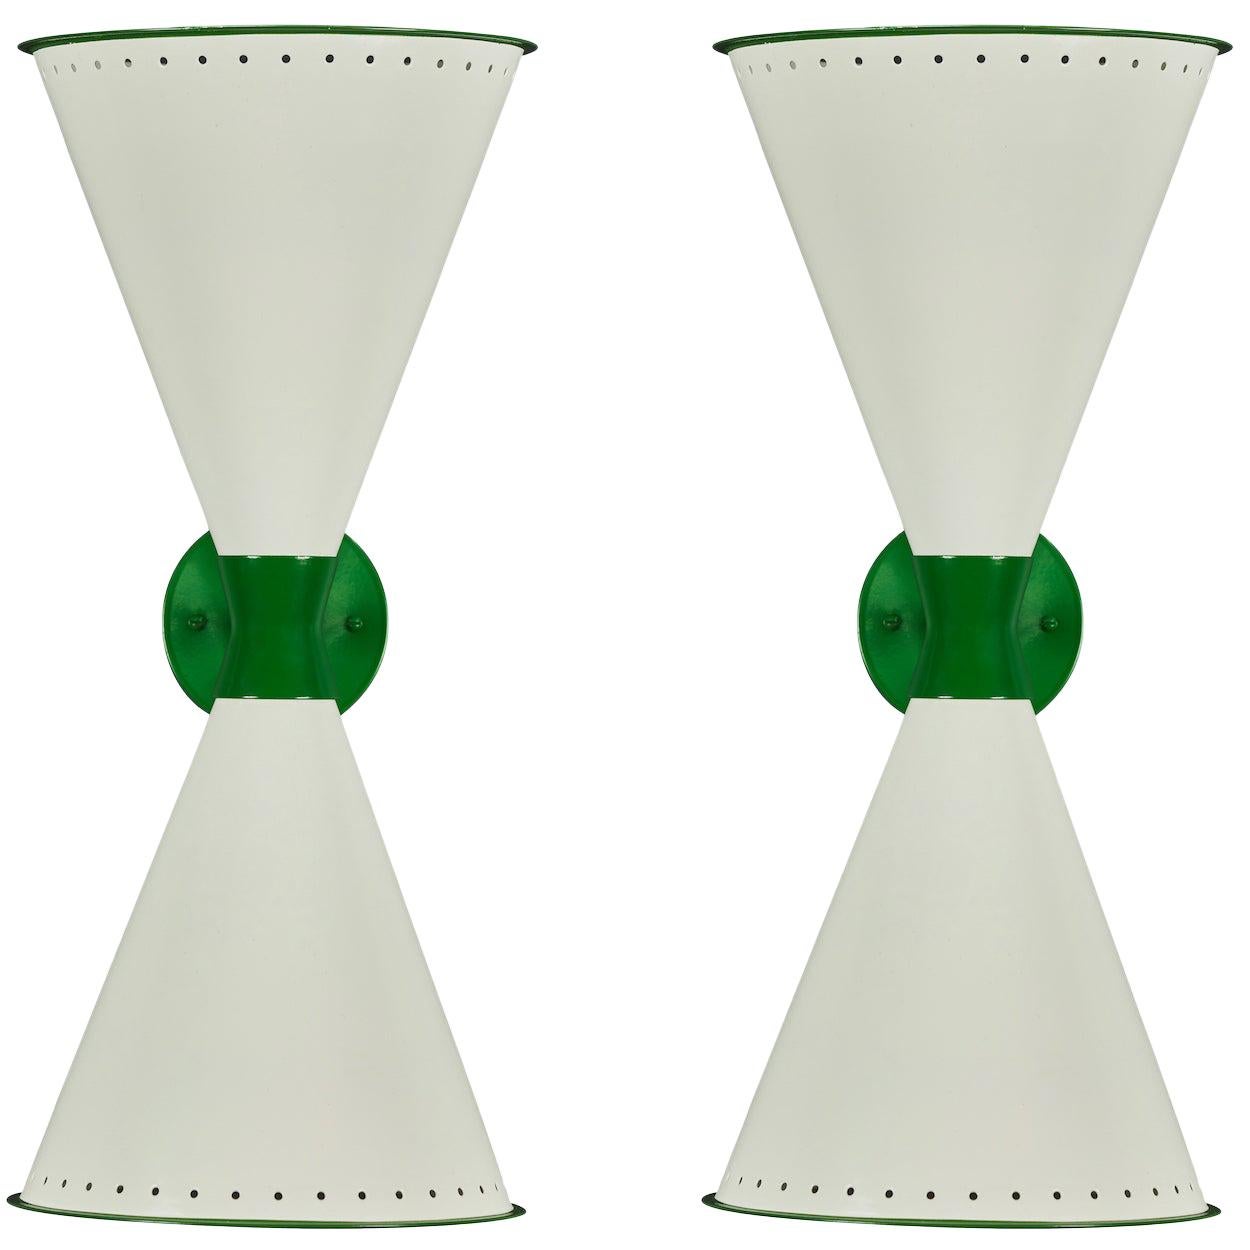 Monumental 'Diabolo' perforated double-cone sconce in white and green. Handcrafted in Los Angeles with scrupulous attention to detail and materials. Executed in high quality lacquered metal perforated shades, this ultra-refined design adds a